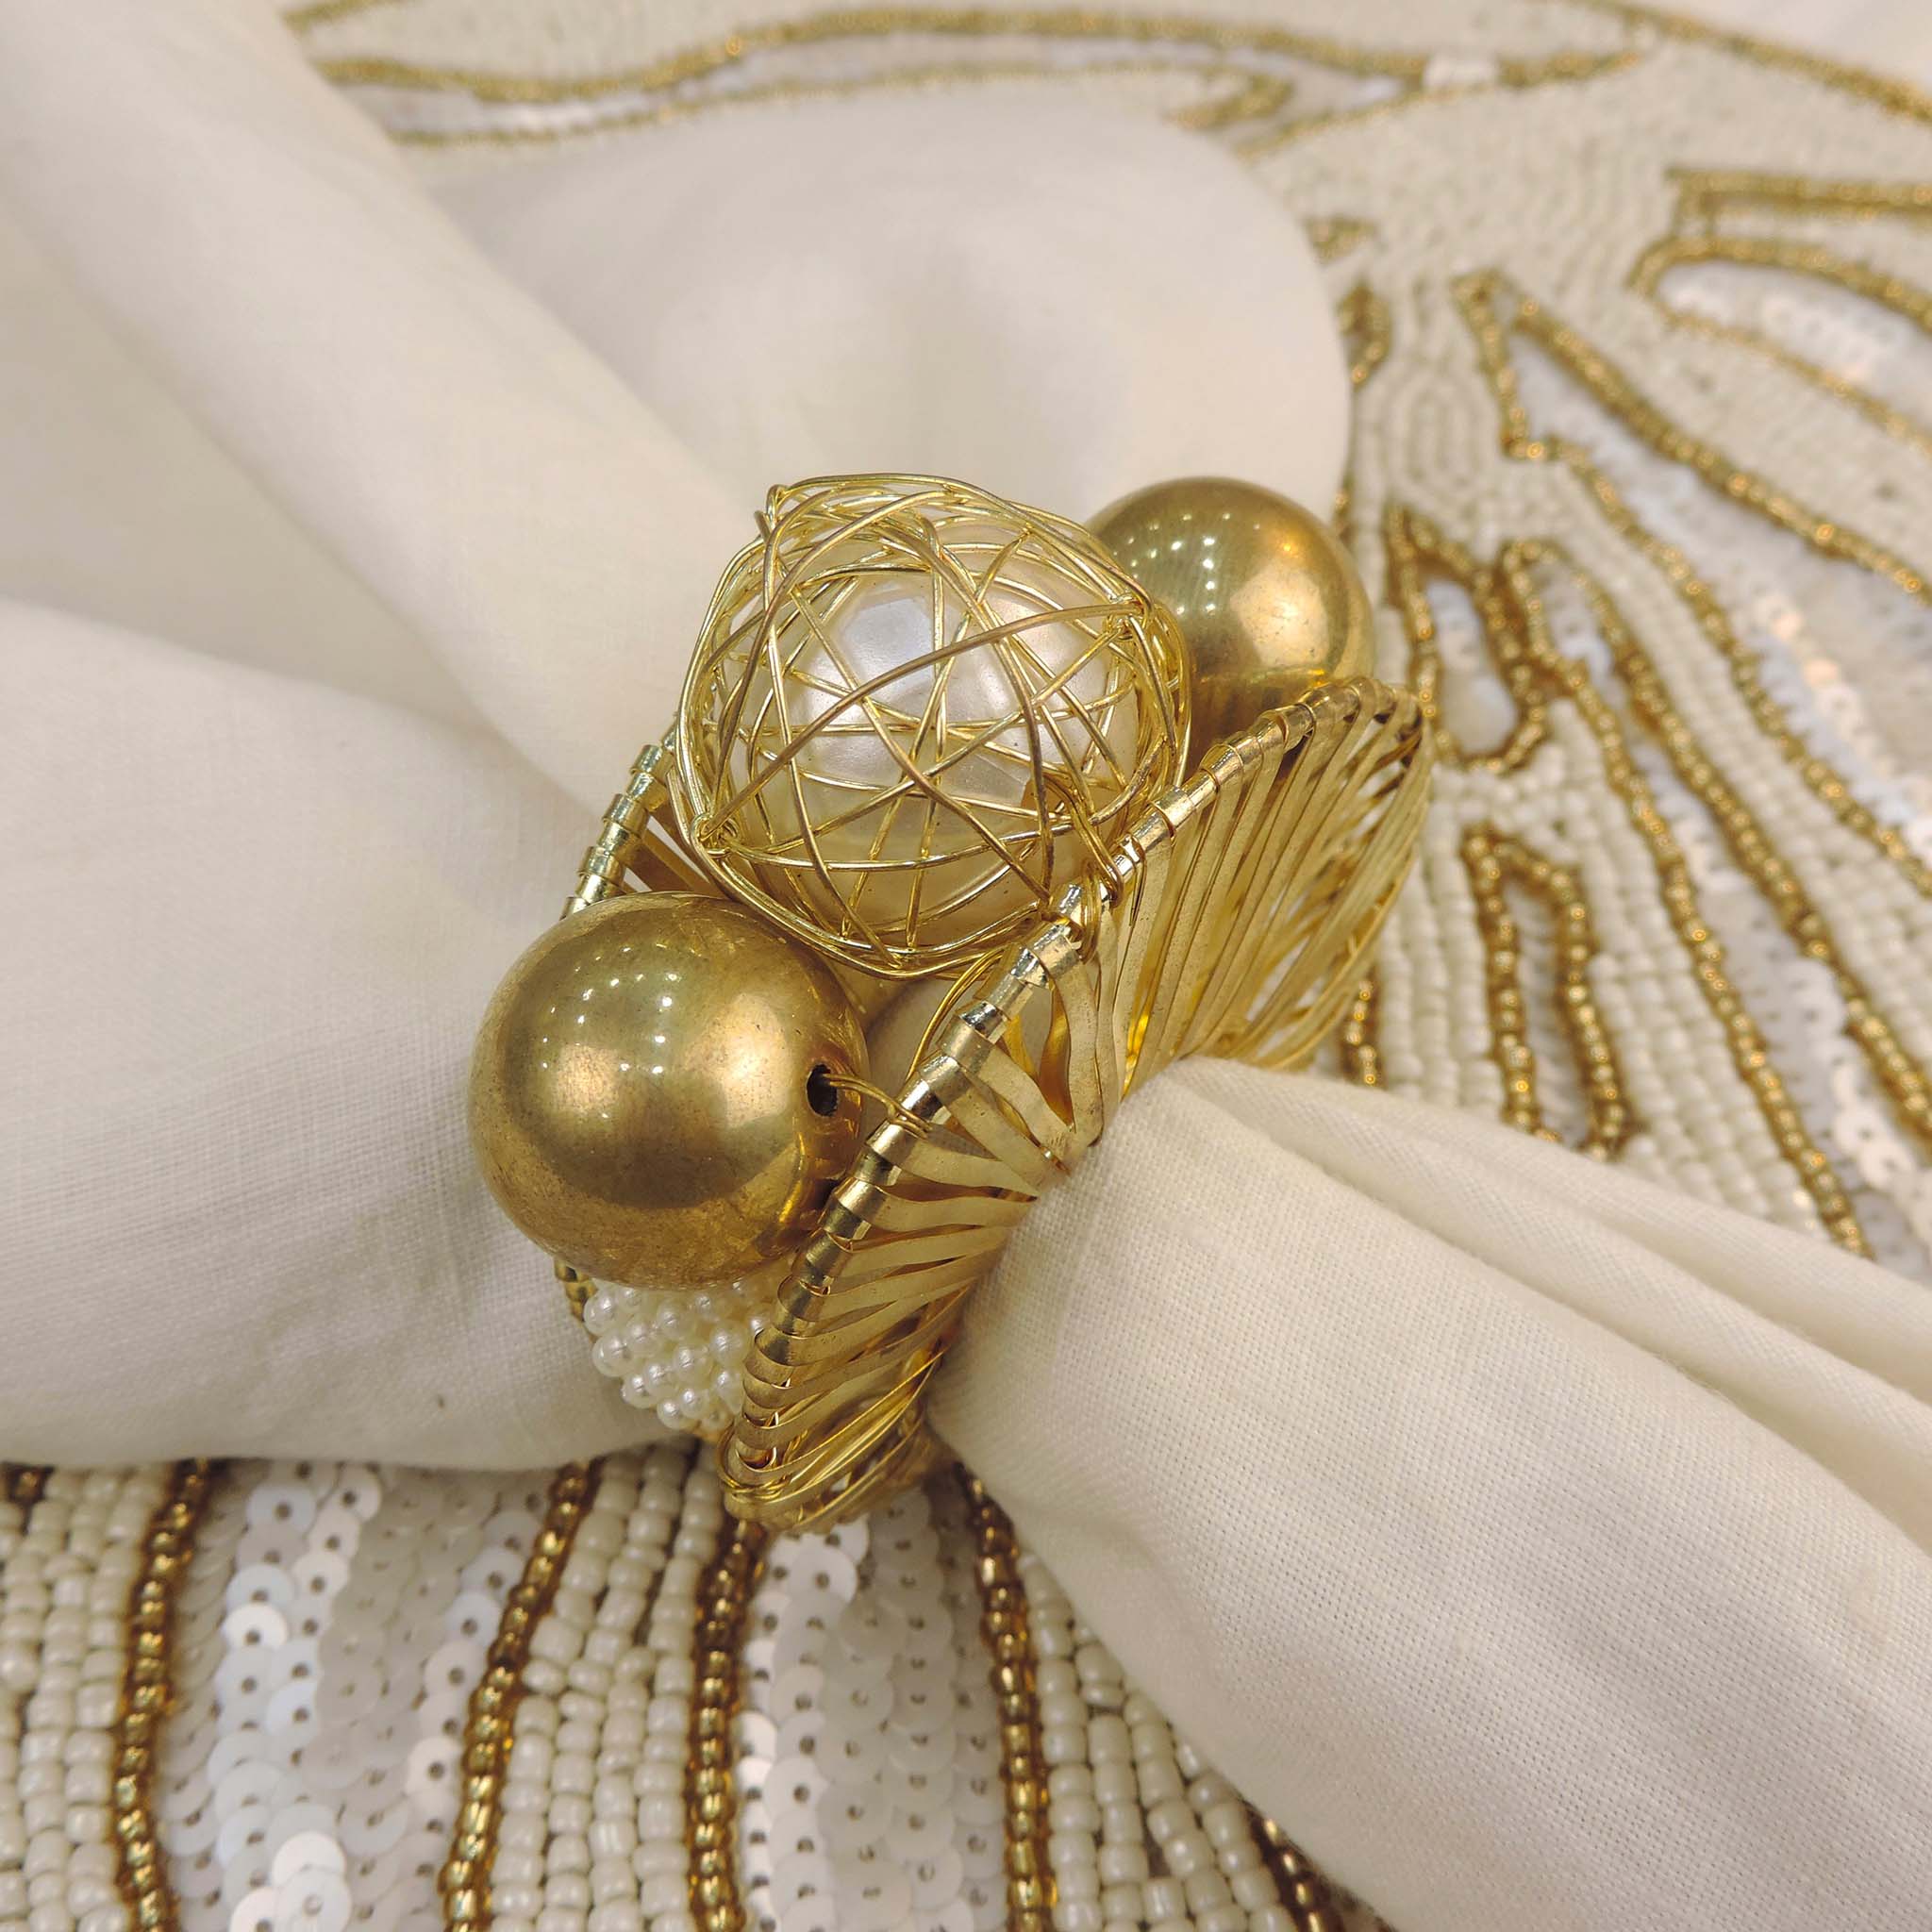 Pearl Napkin Ring in Gold, Set of 4